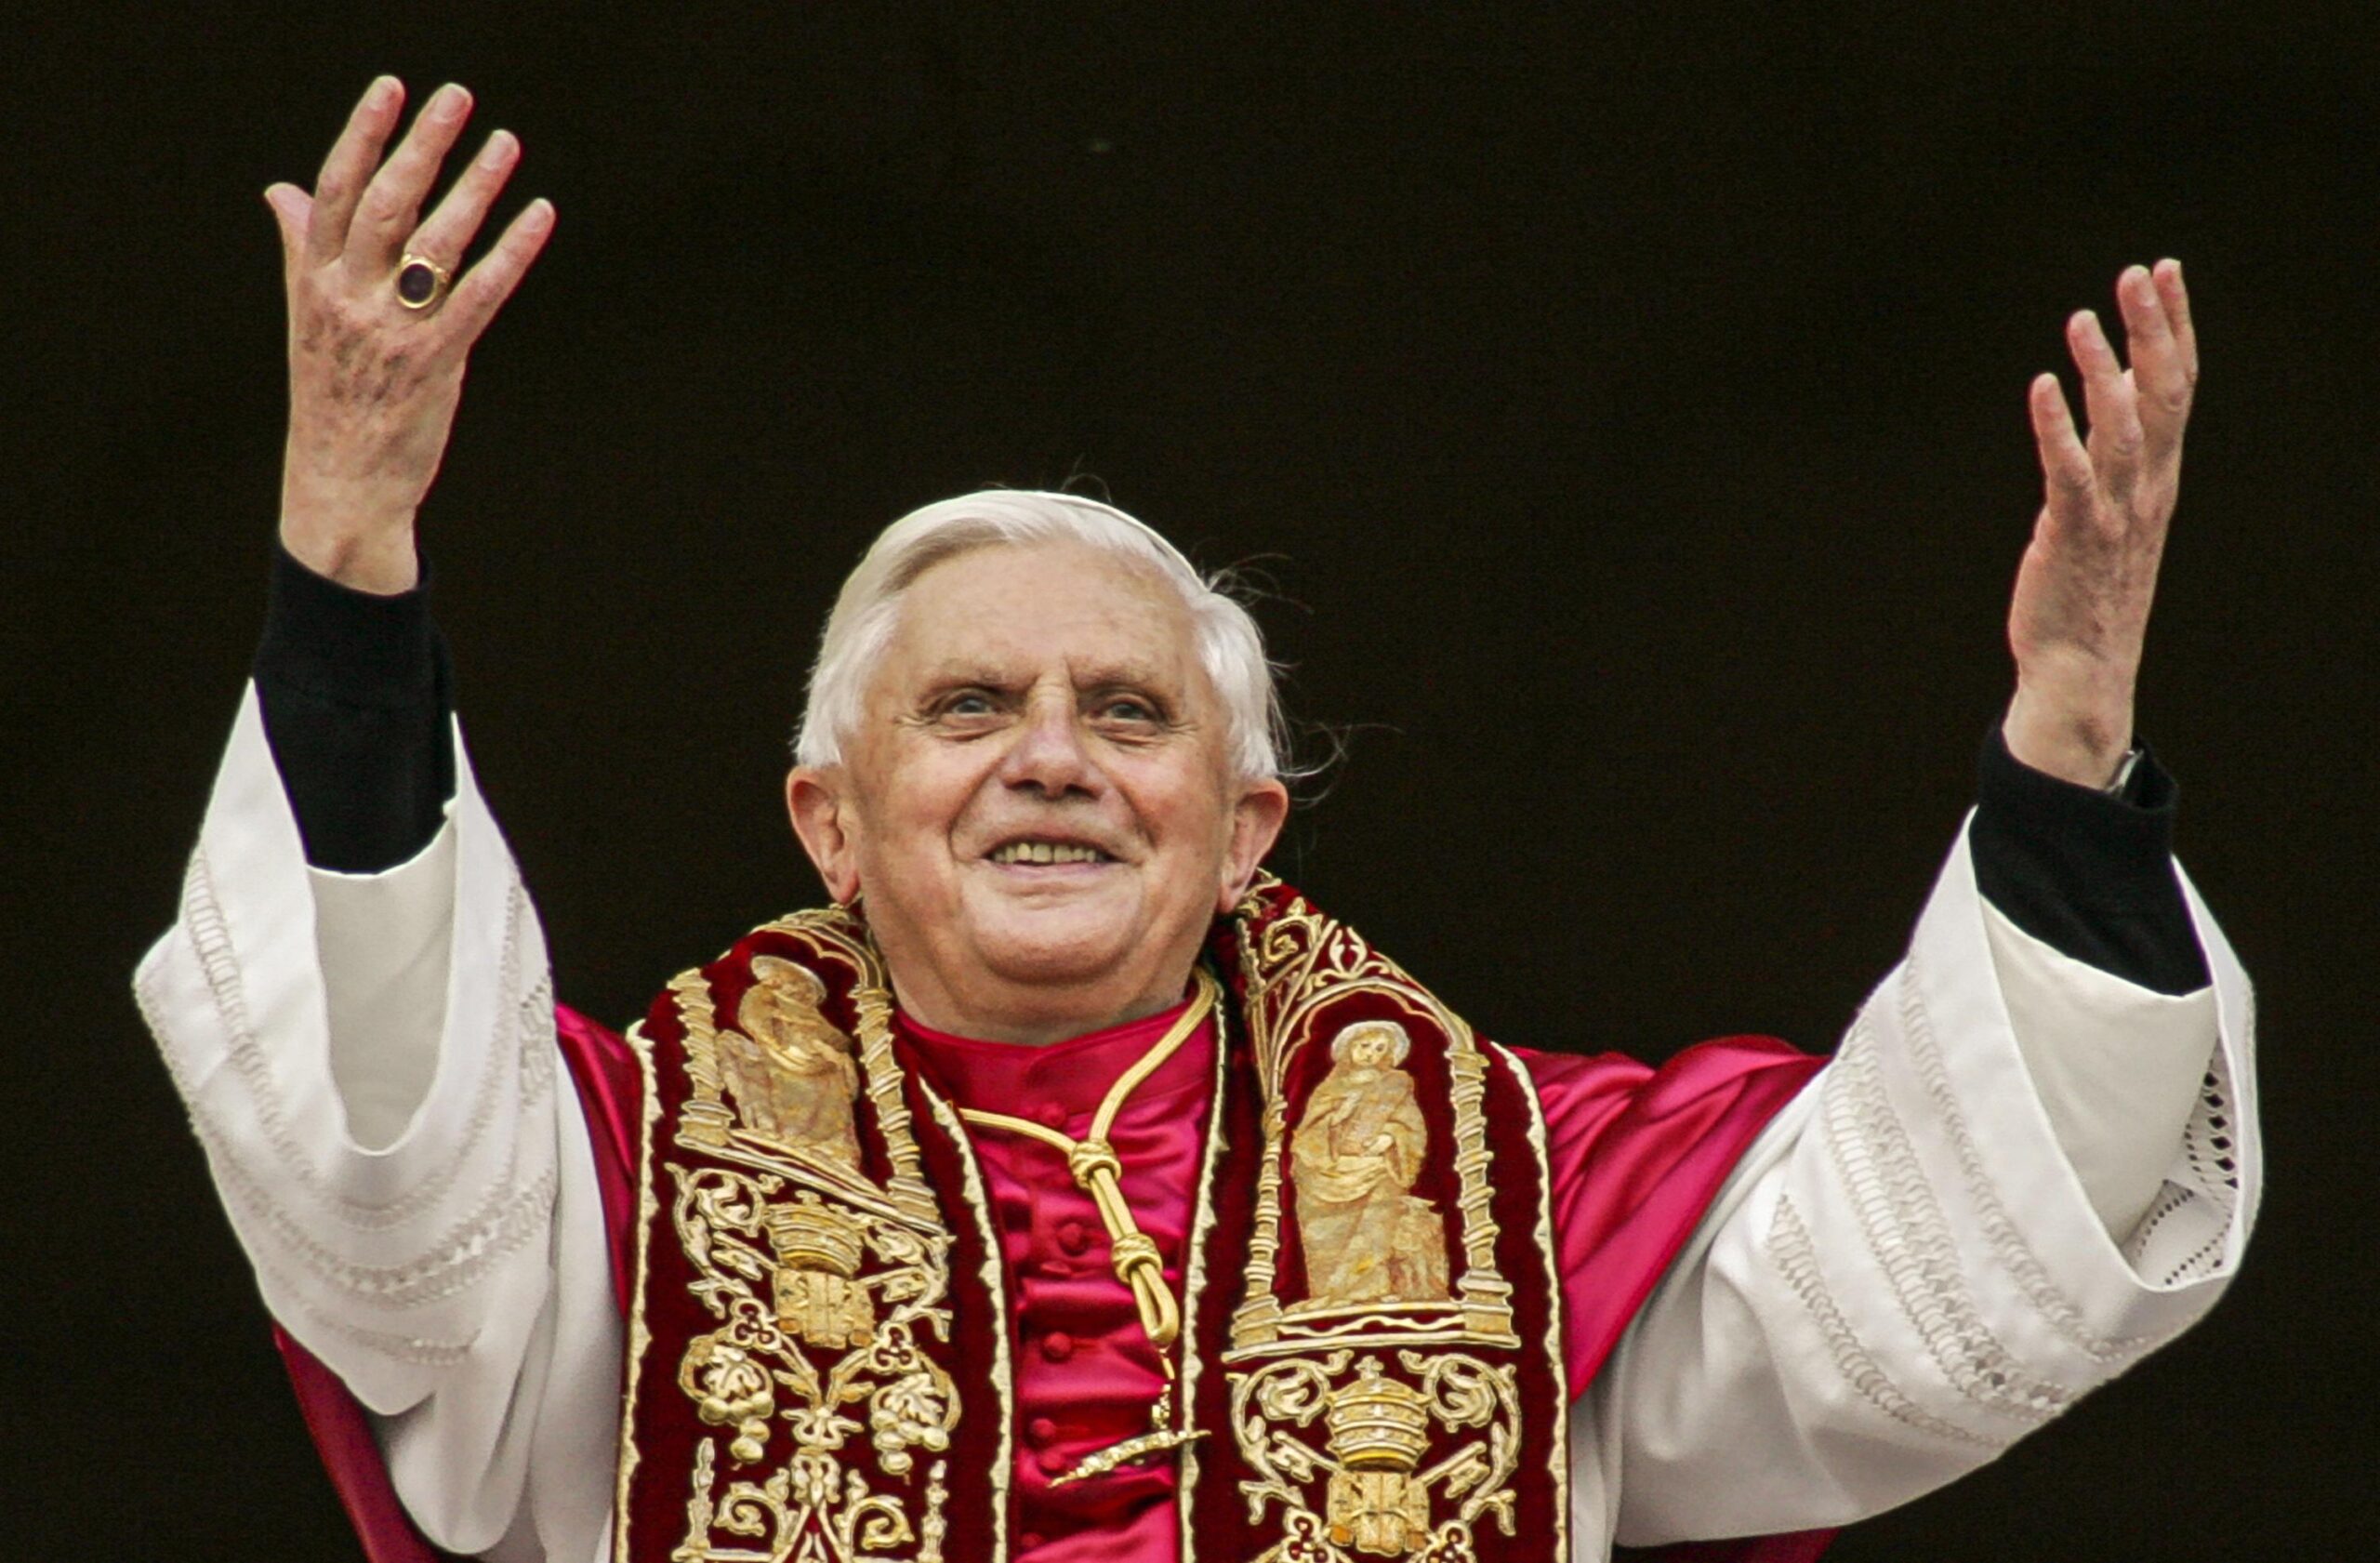 Farewell to Benedict XVI: ‘Humble worker in the vineyard of the Lord’